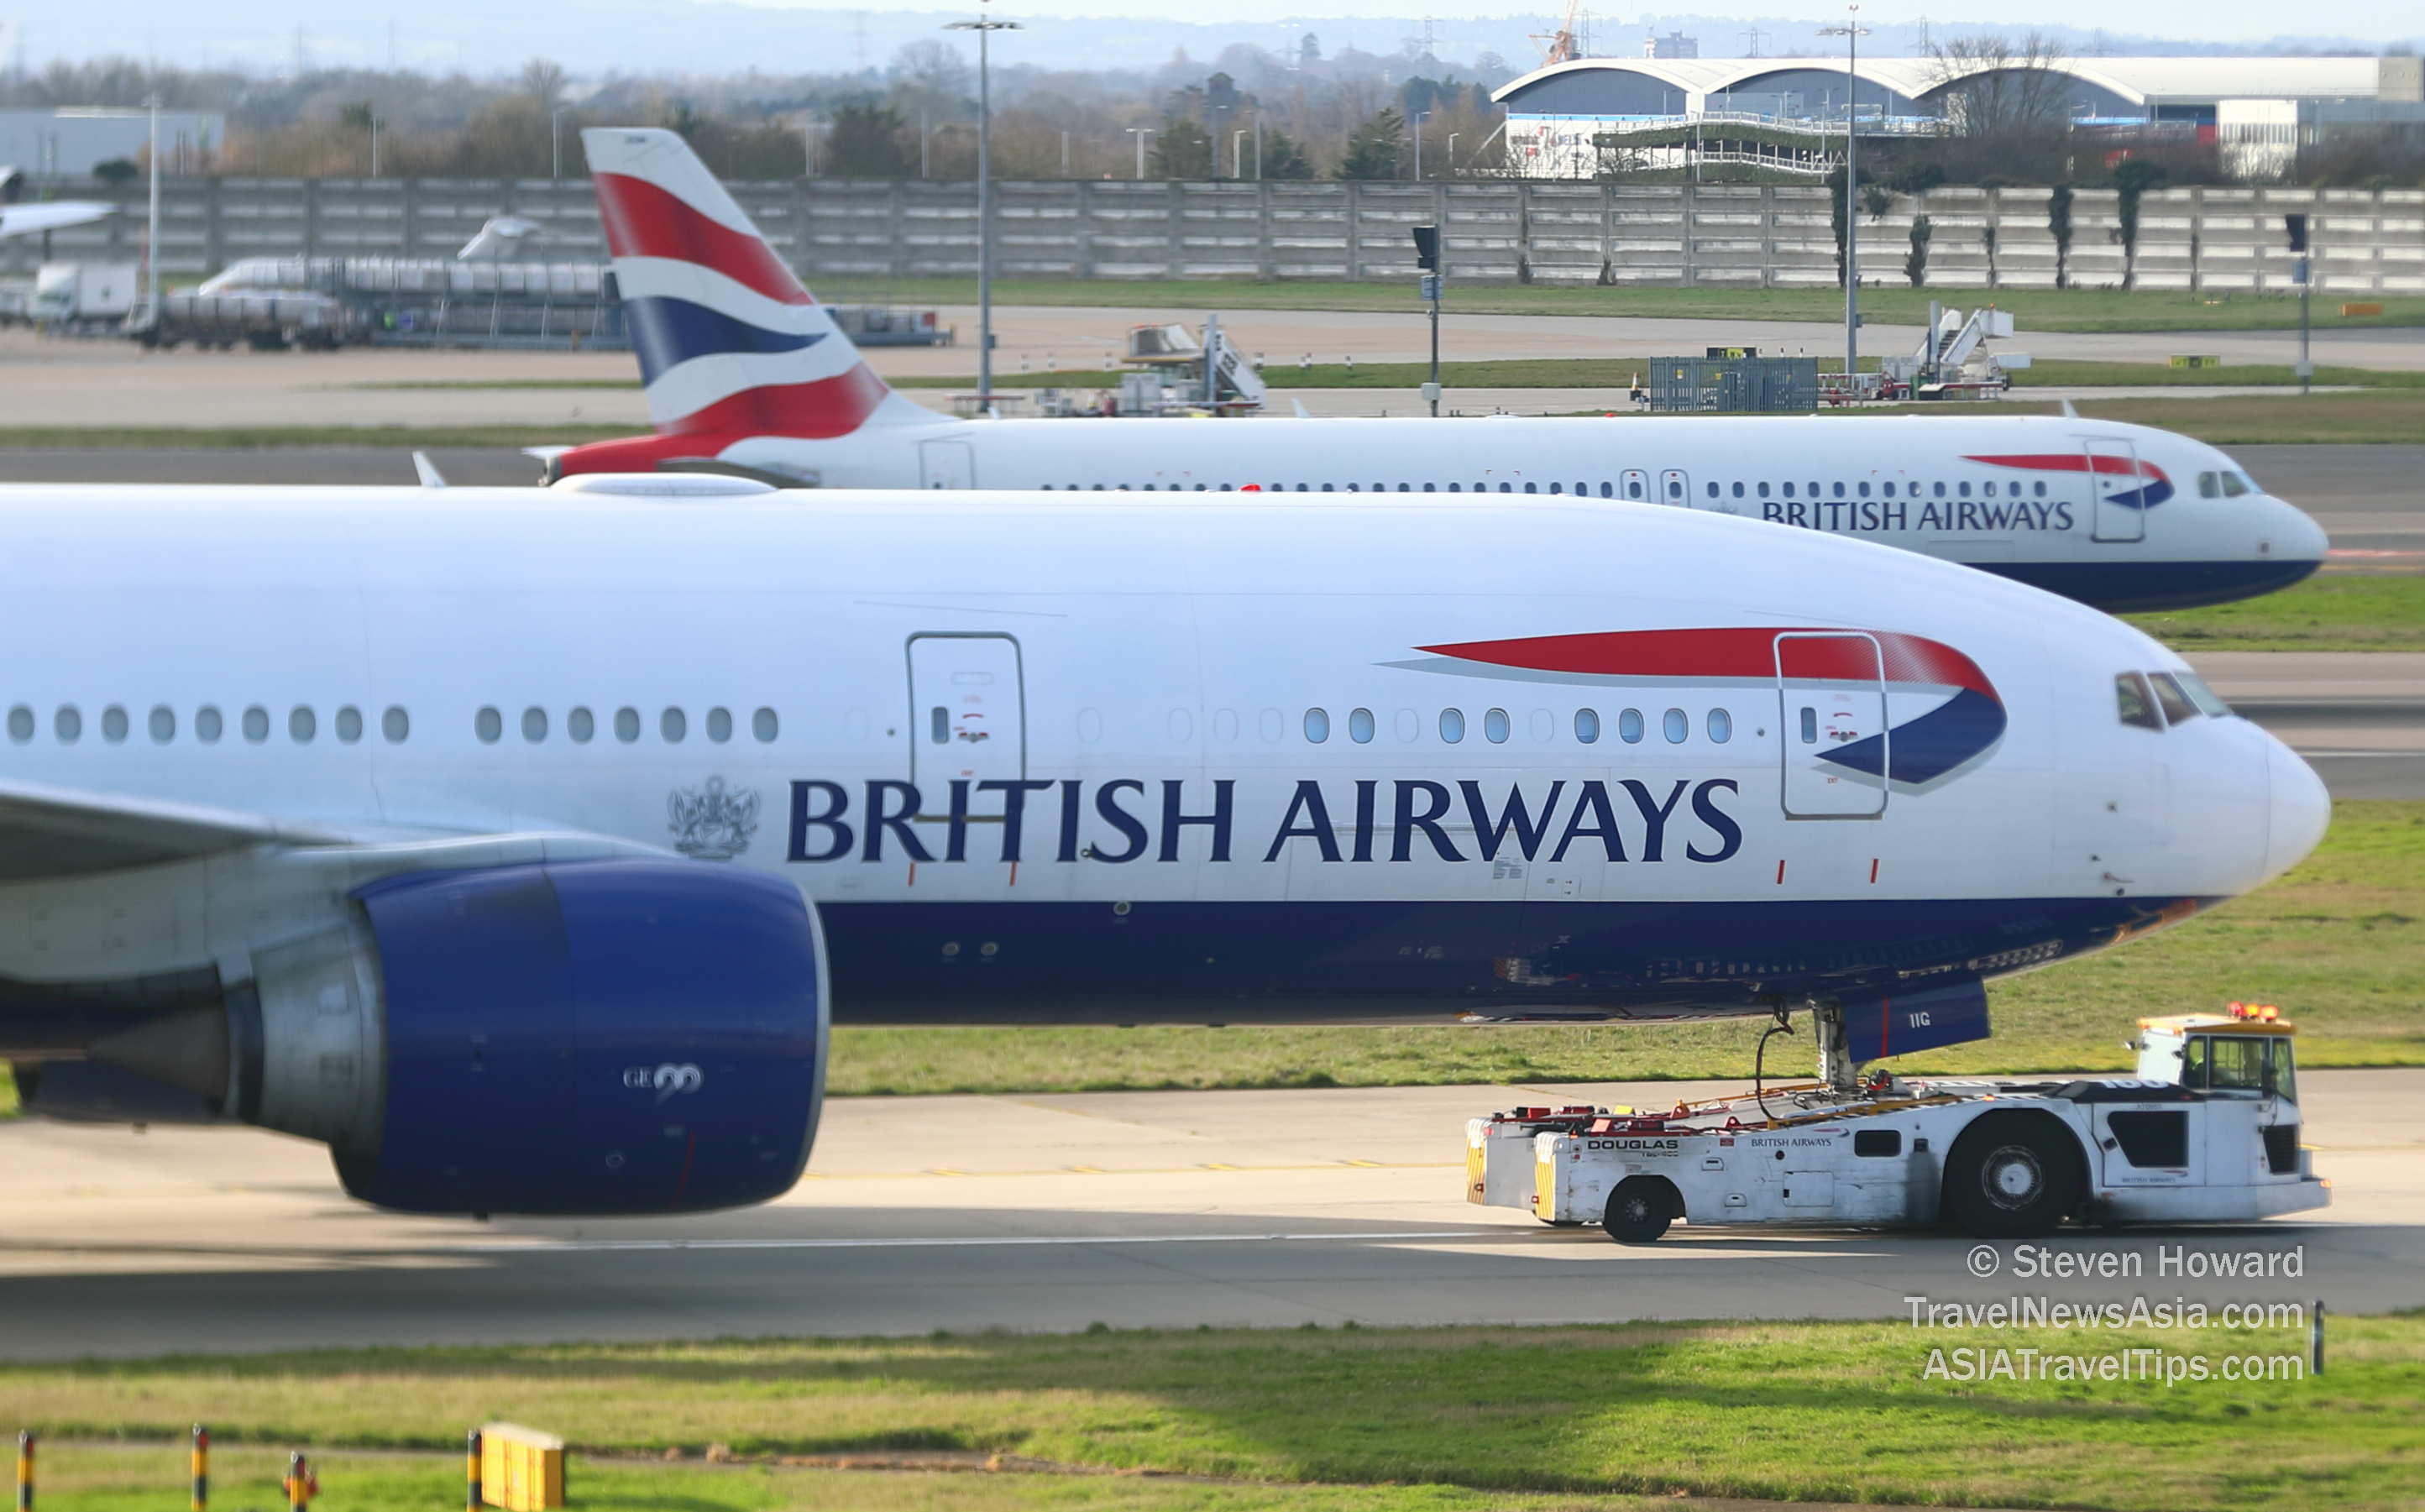 British Airways aircraft at London Heathrow. Picture by Steven Howard of TravelNewsAsia.com Click to enlarge.